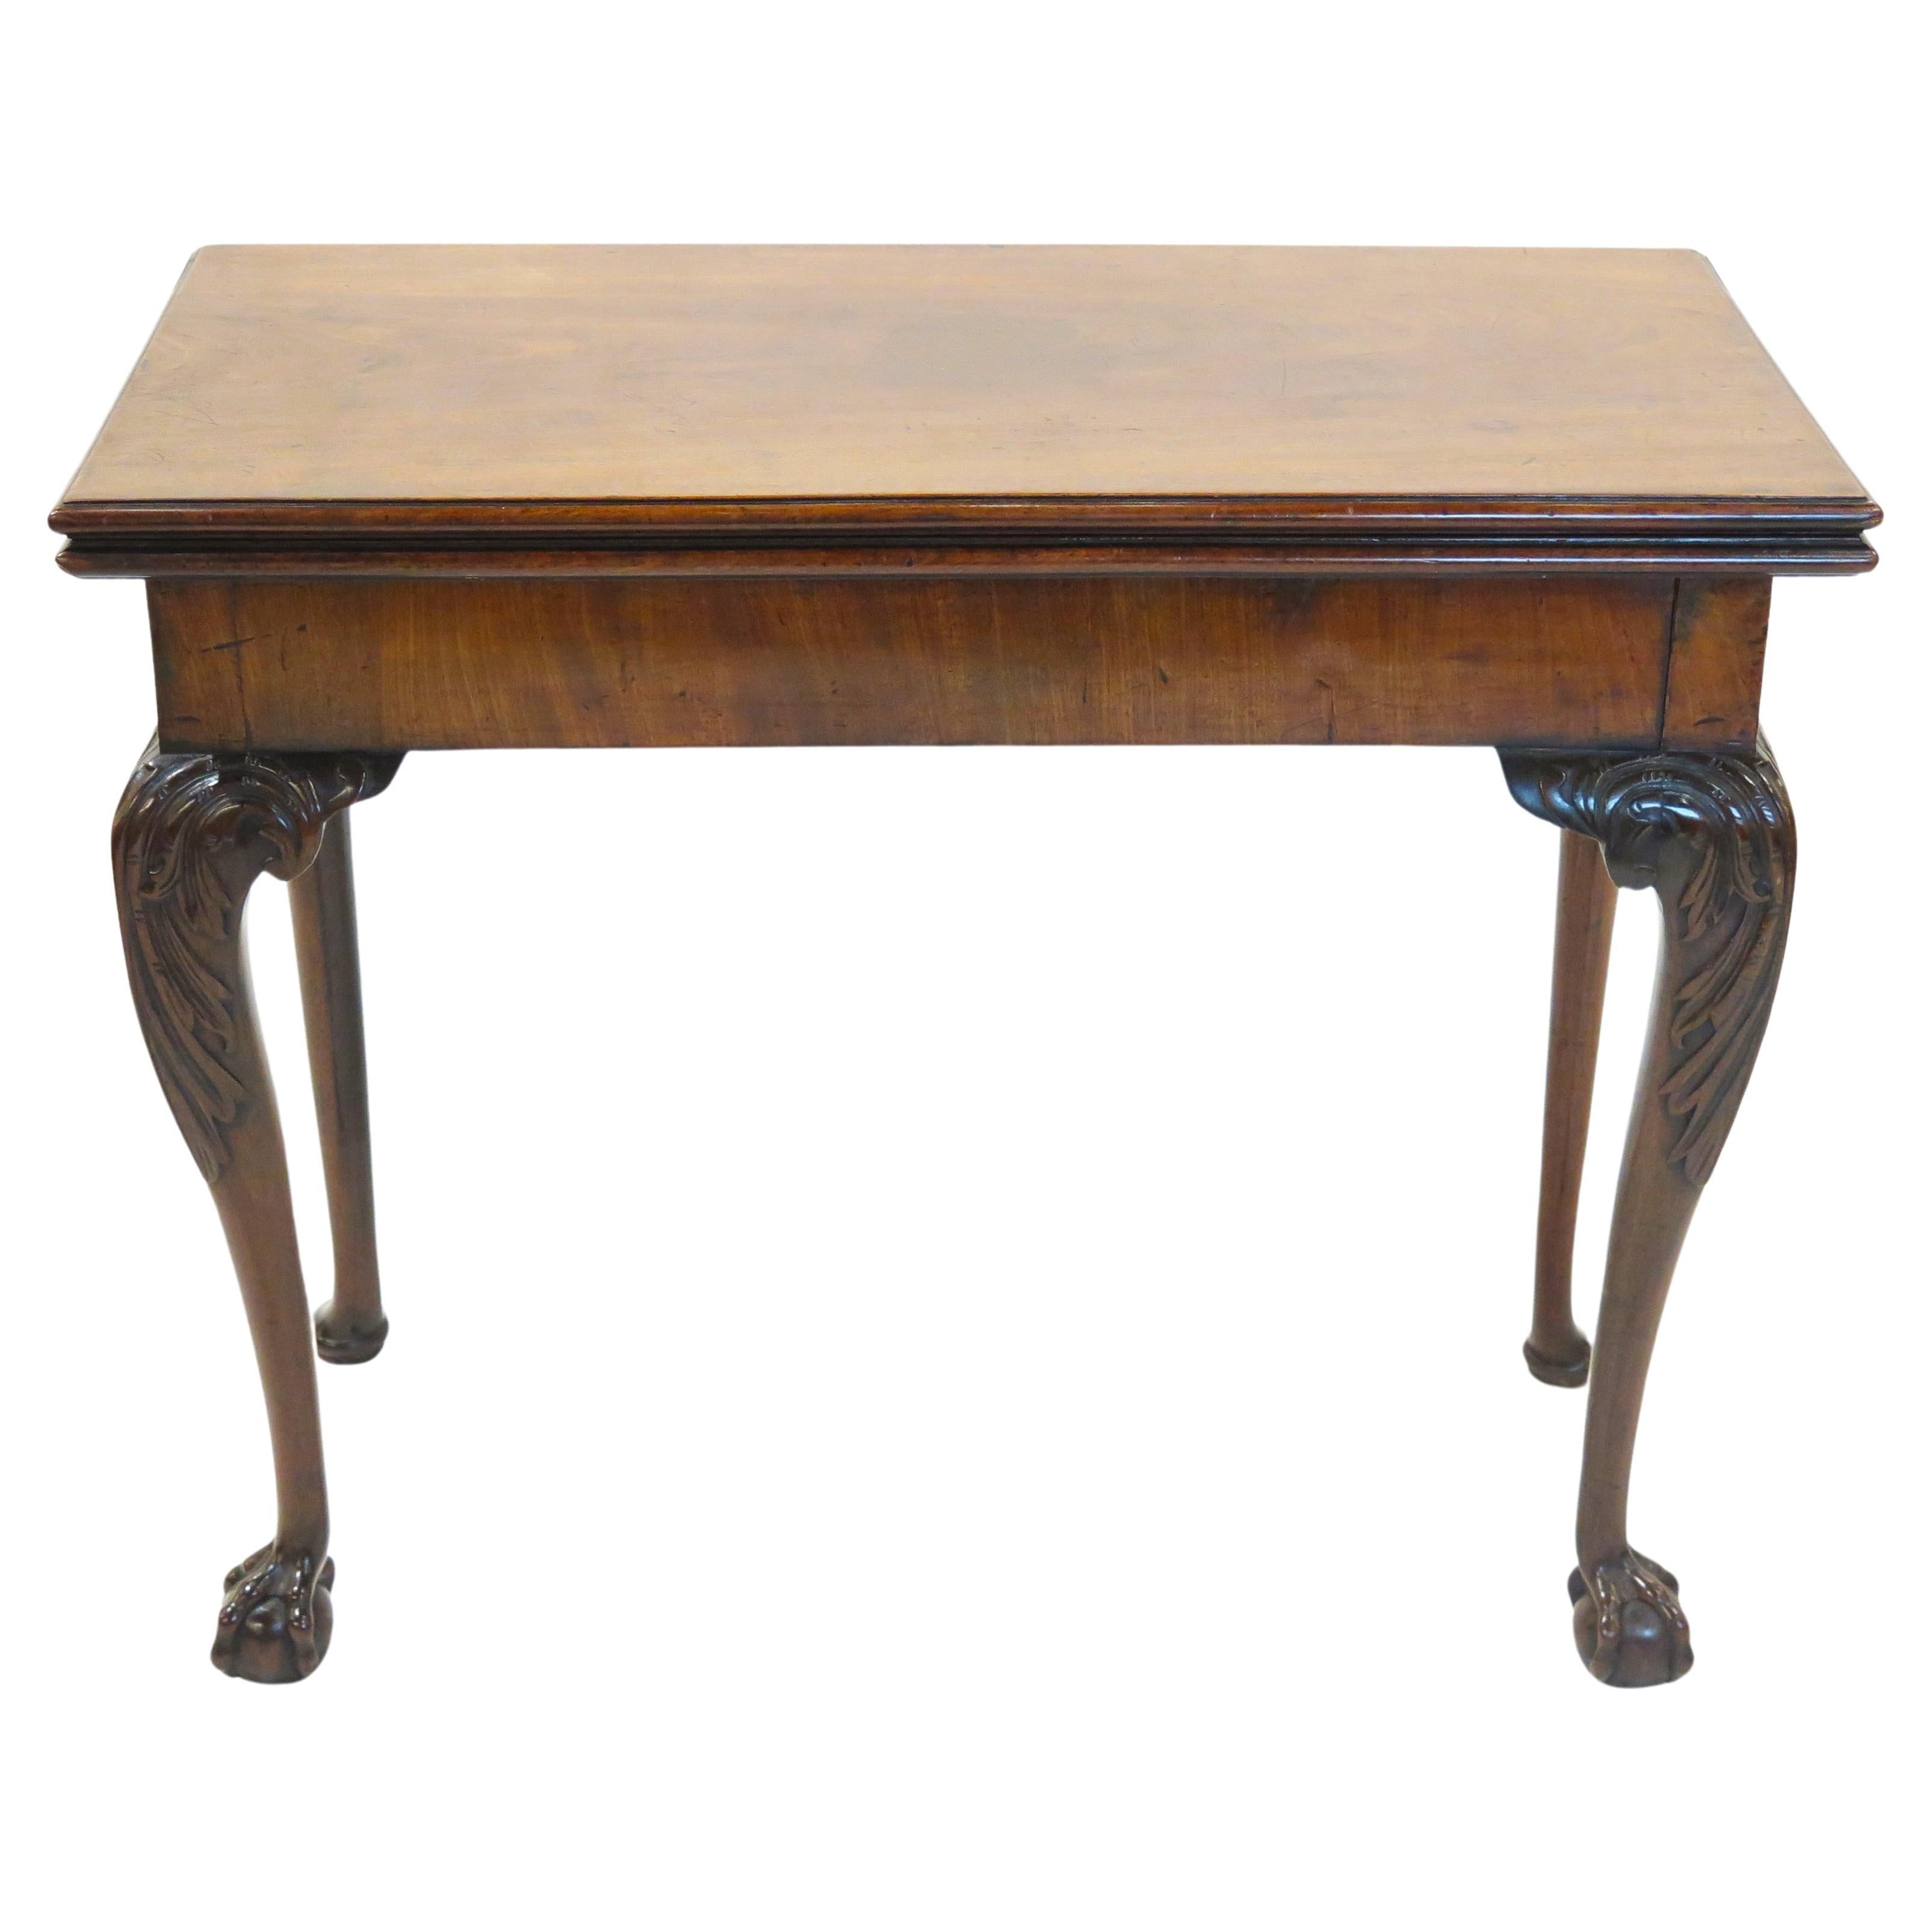 George II Mahogany Card / Tea Table with Concertina Action